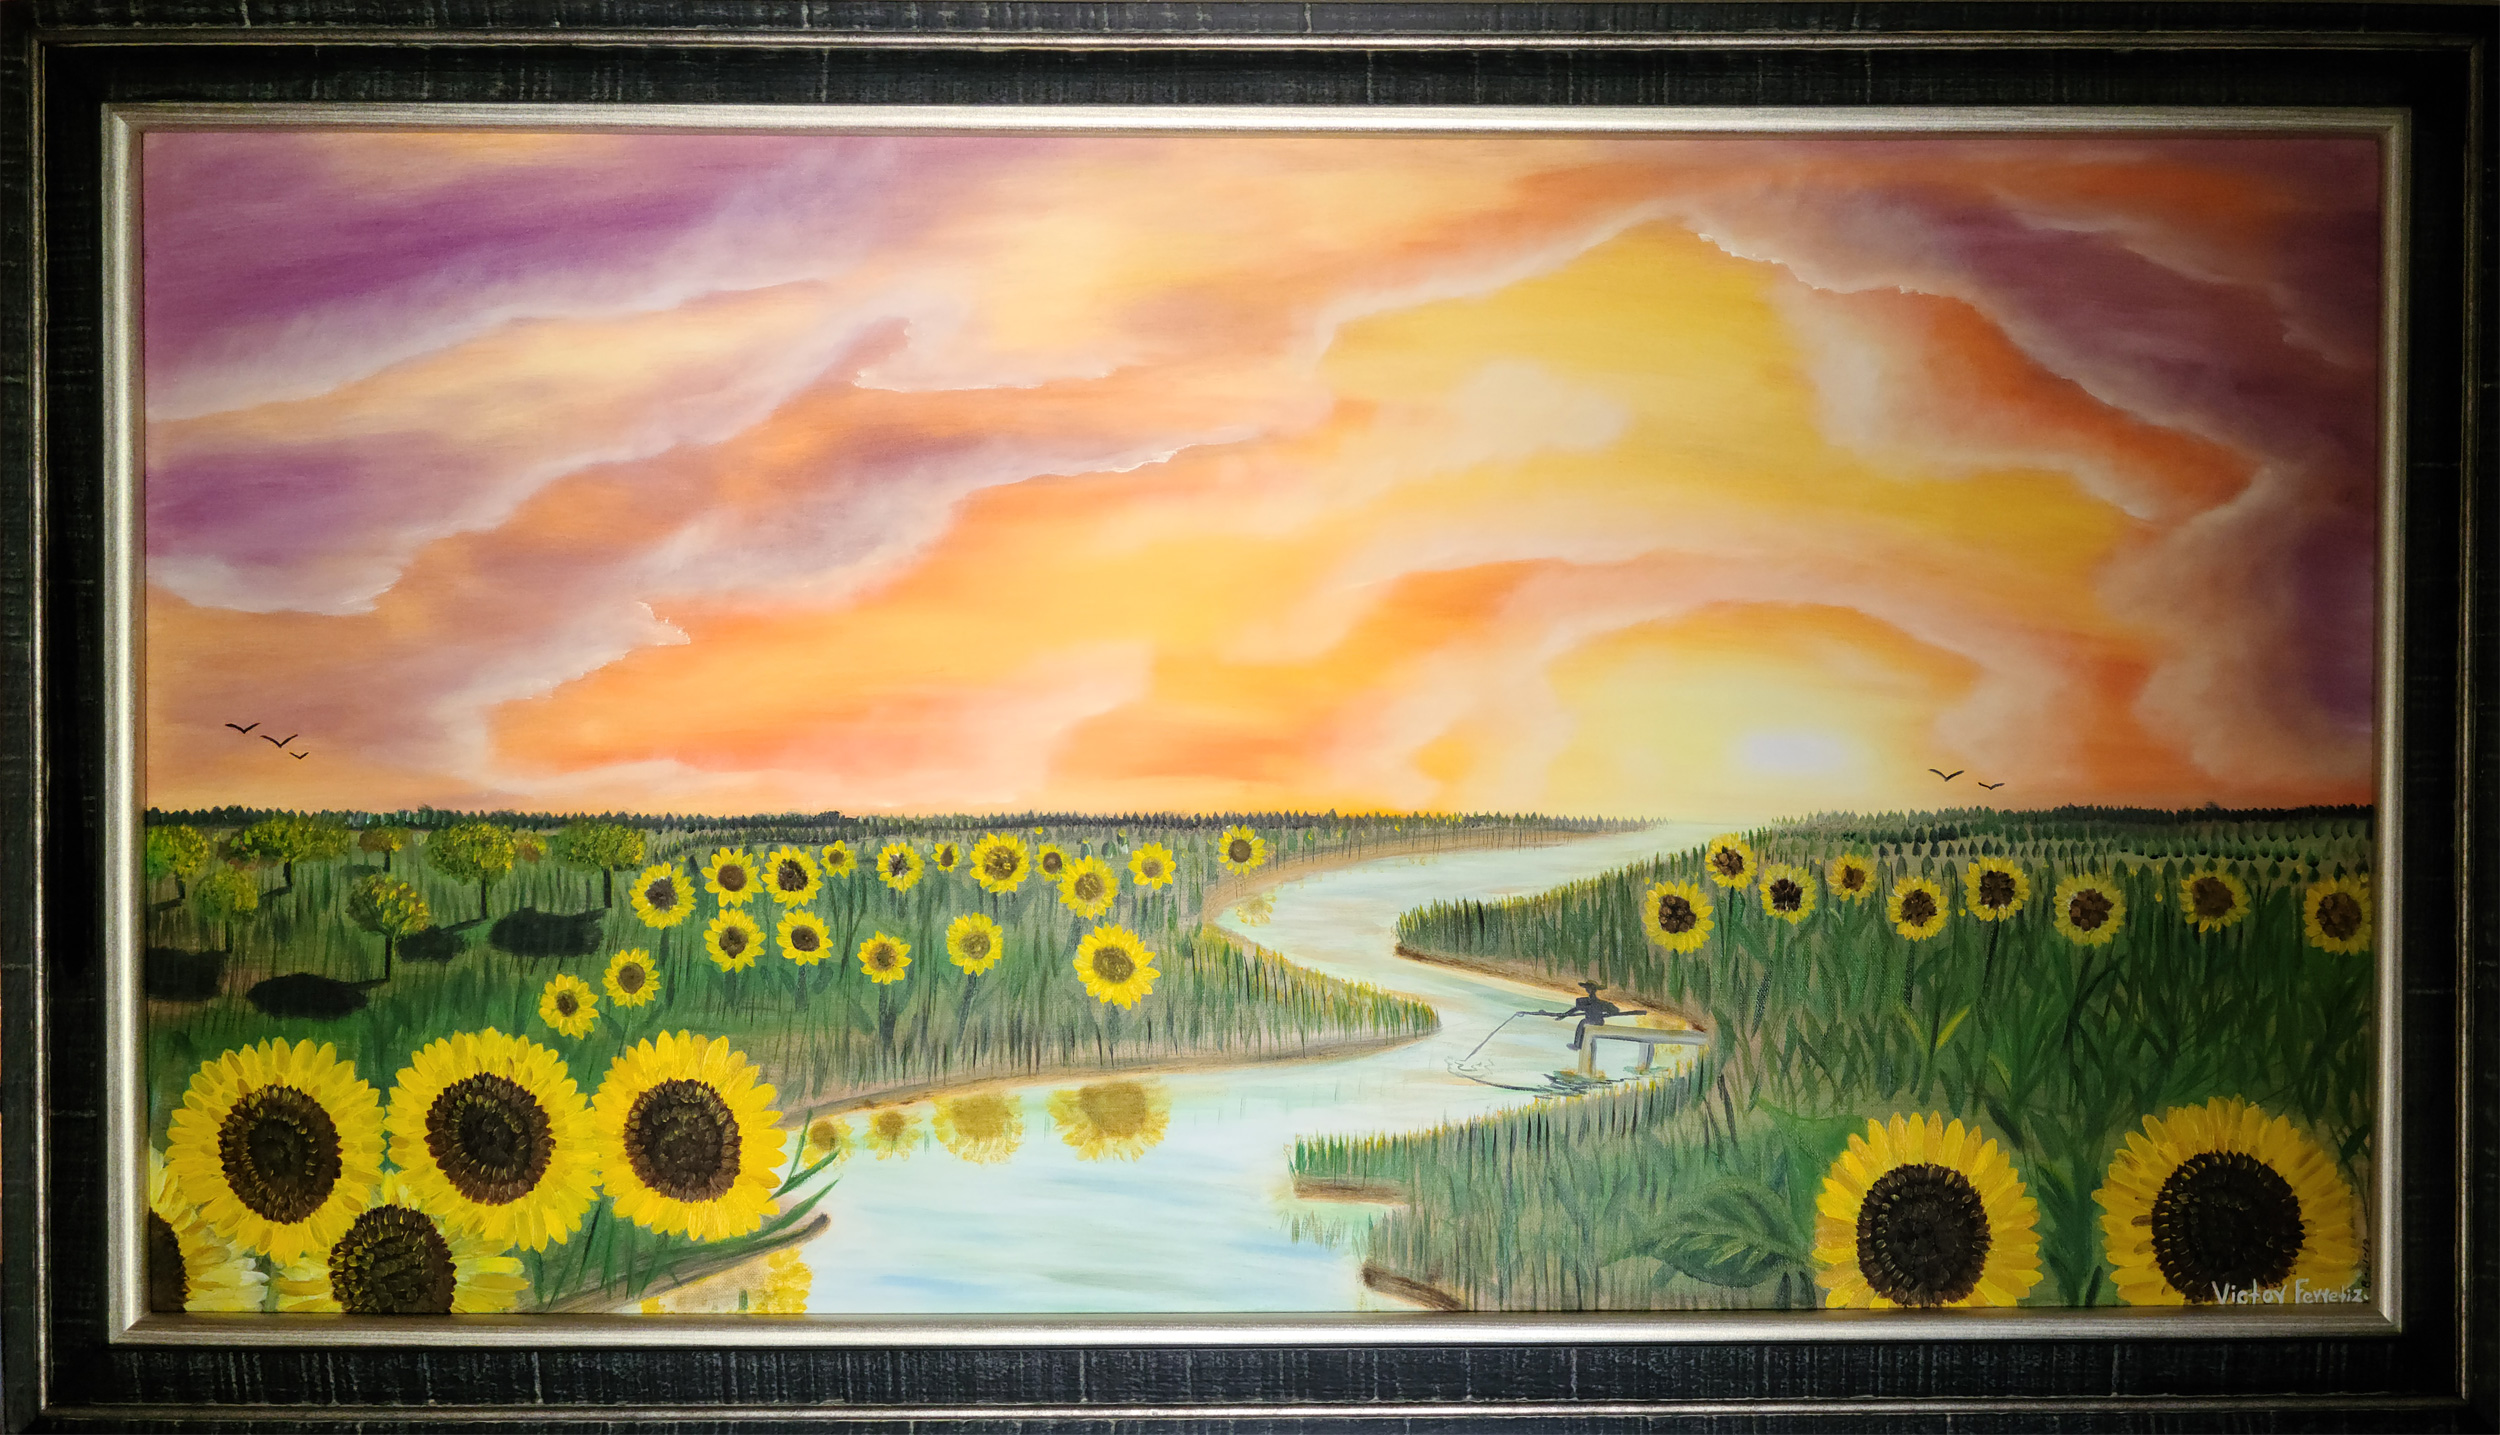 This original painting depicts a landscape of sunflowers and a man fishing on the river during a beautiful sunset.